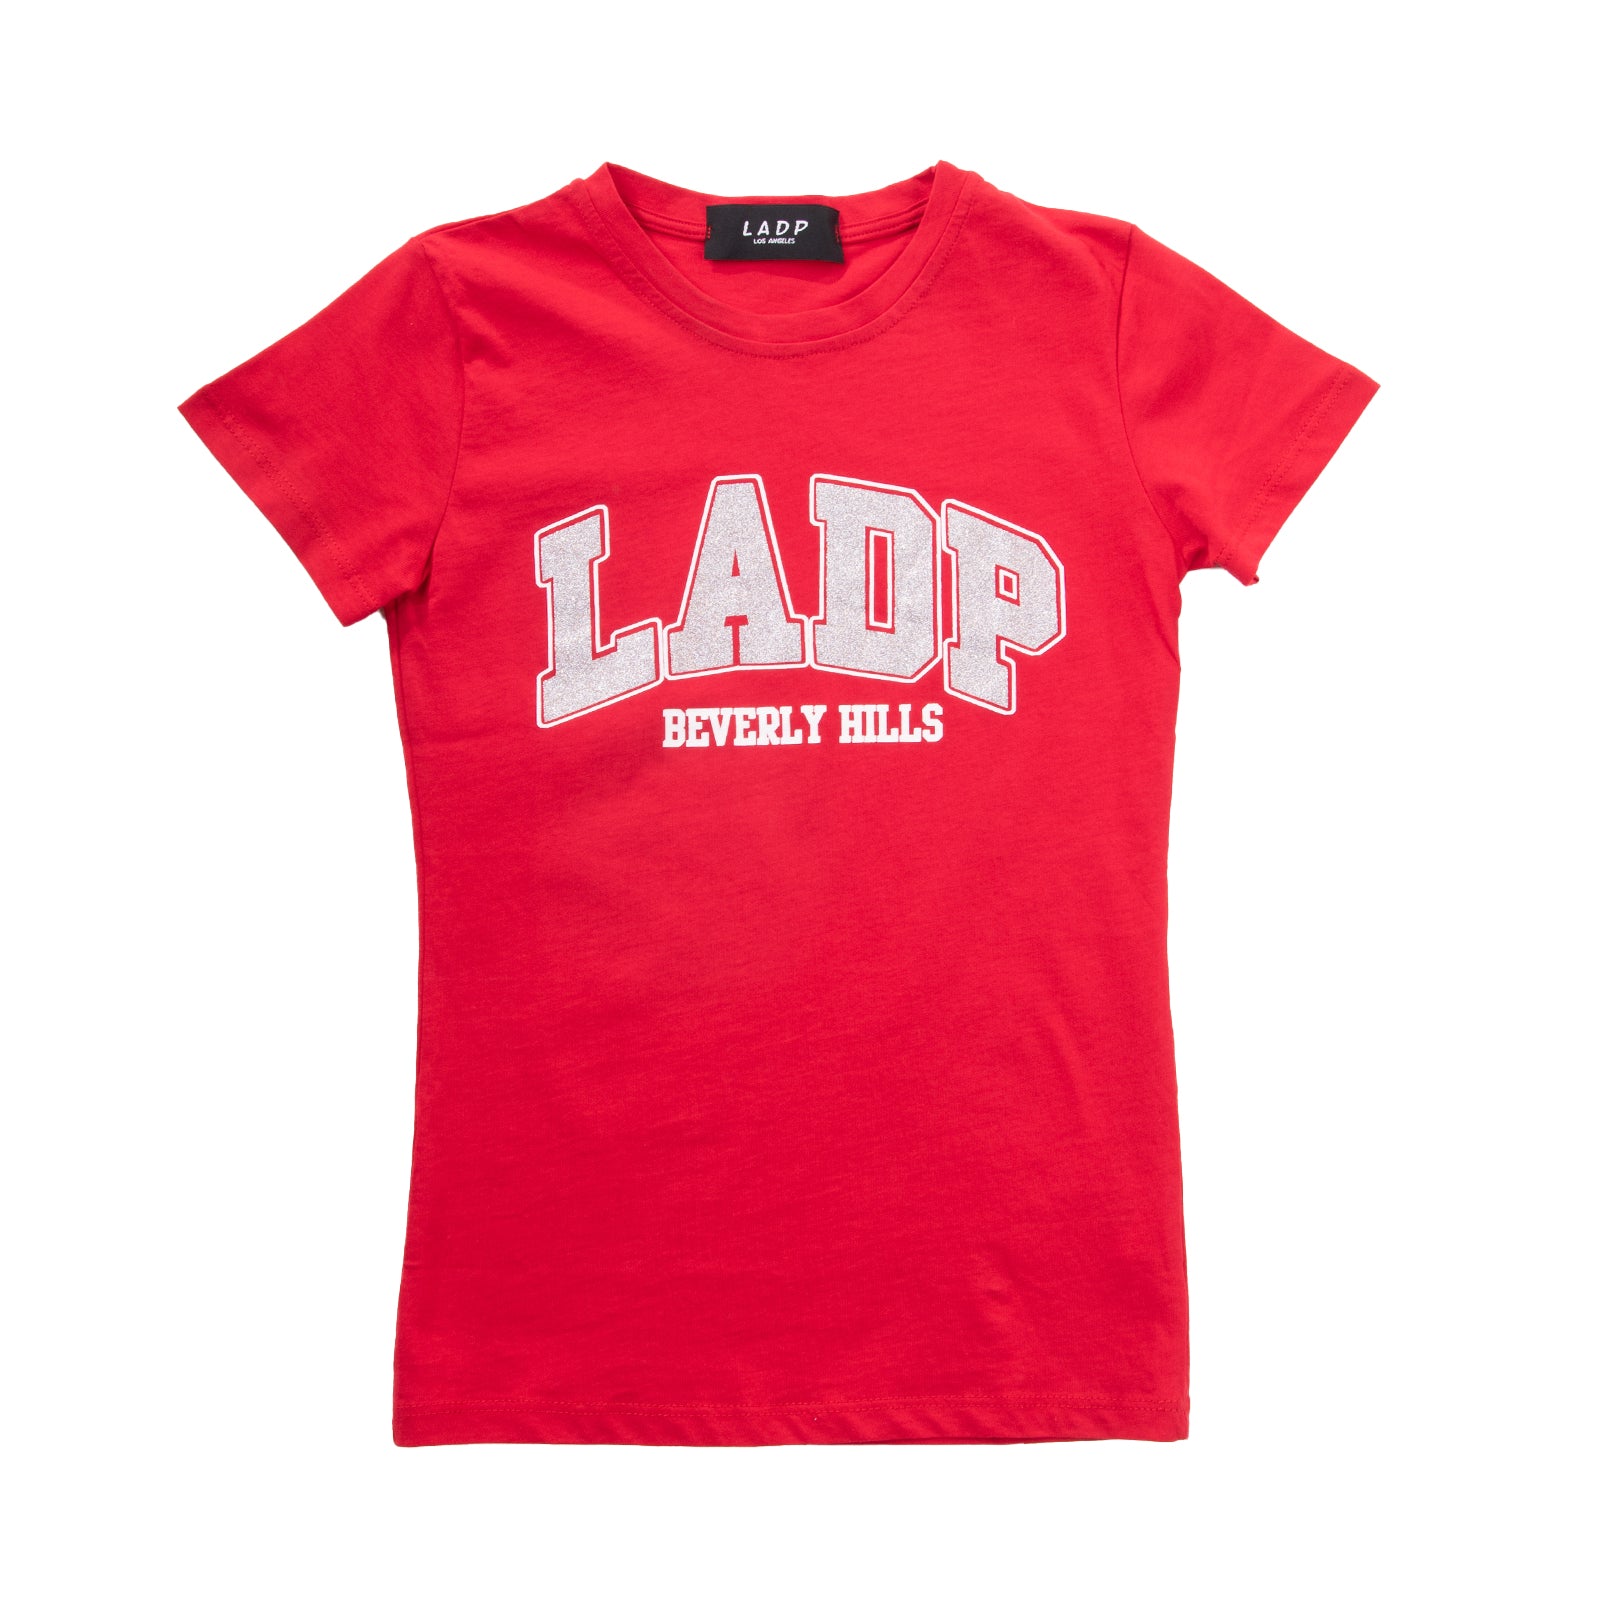 LADP T-Shirt Top Size 8Y Coated & Glittered Front Short Sleeve Made in Italy gallery main photo